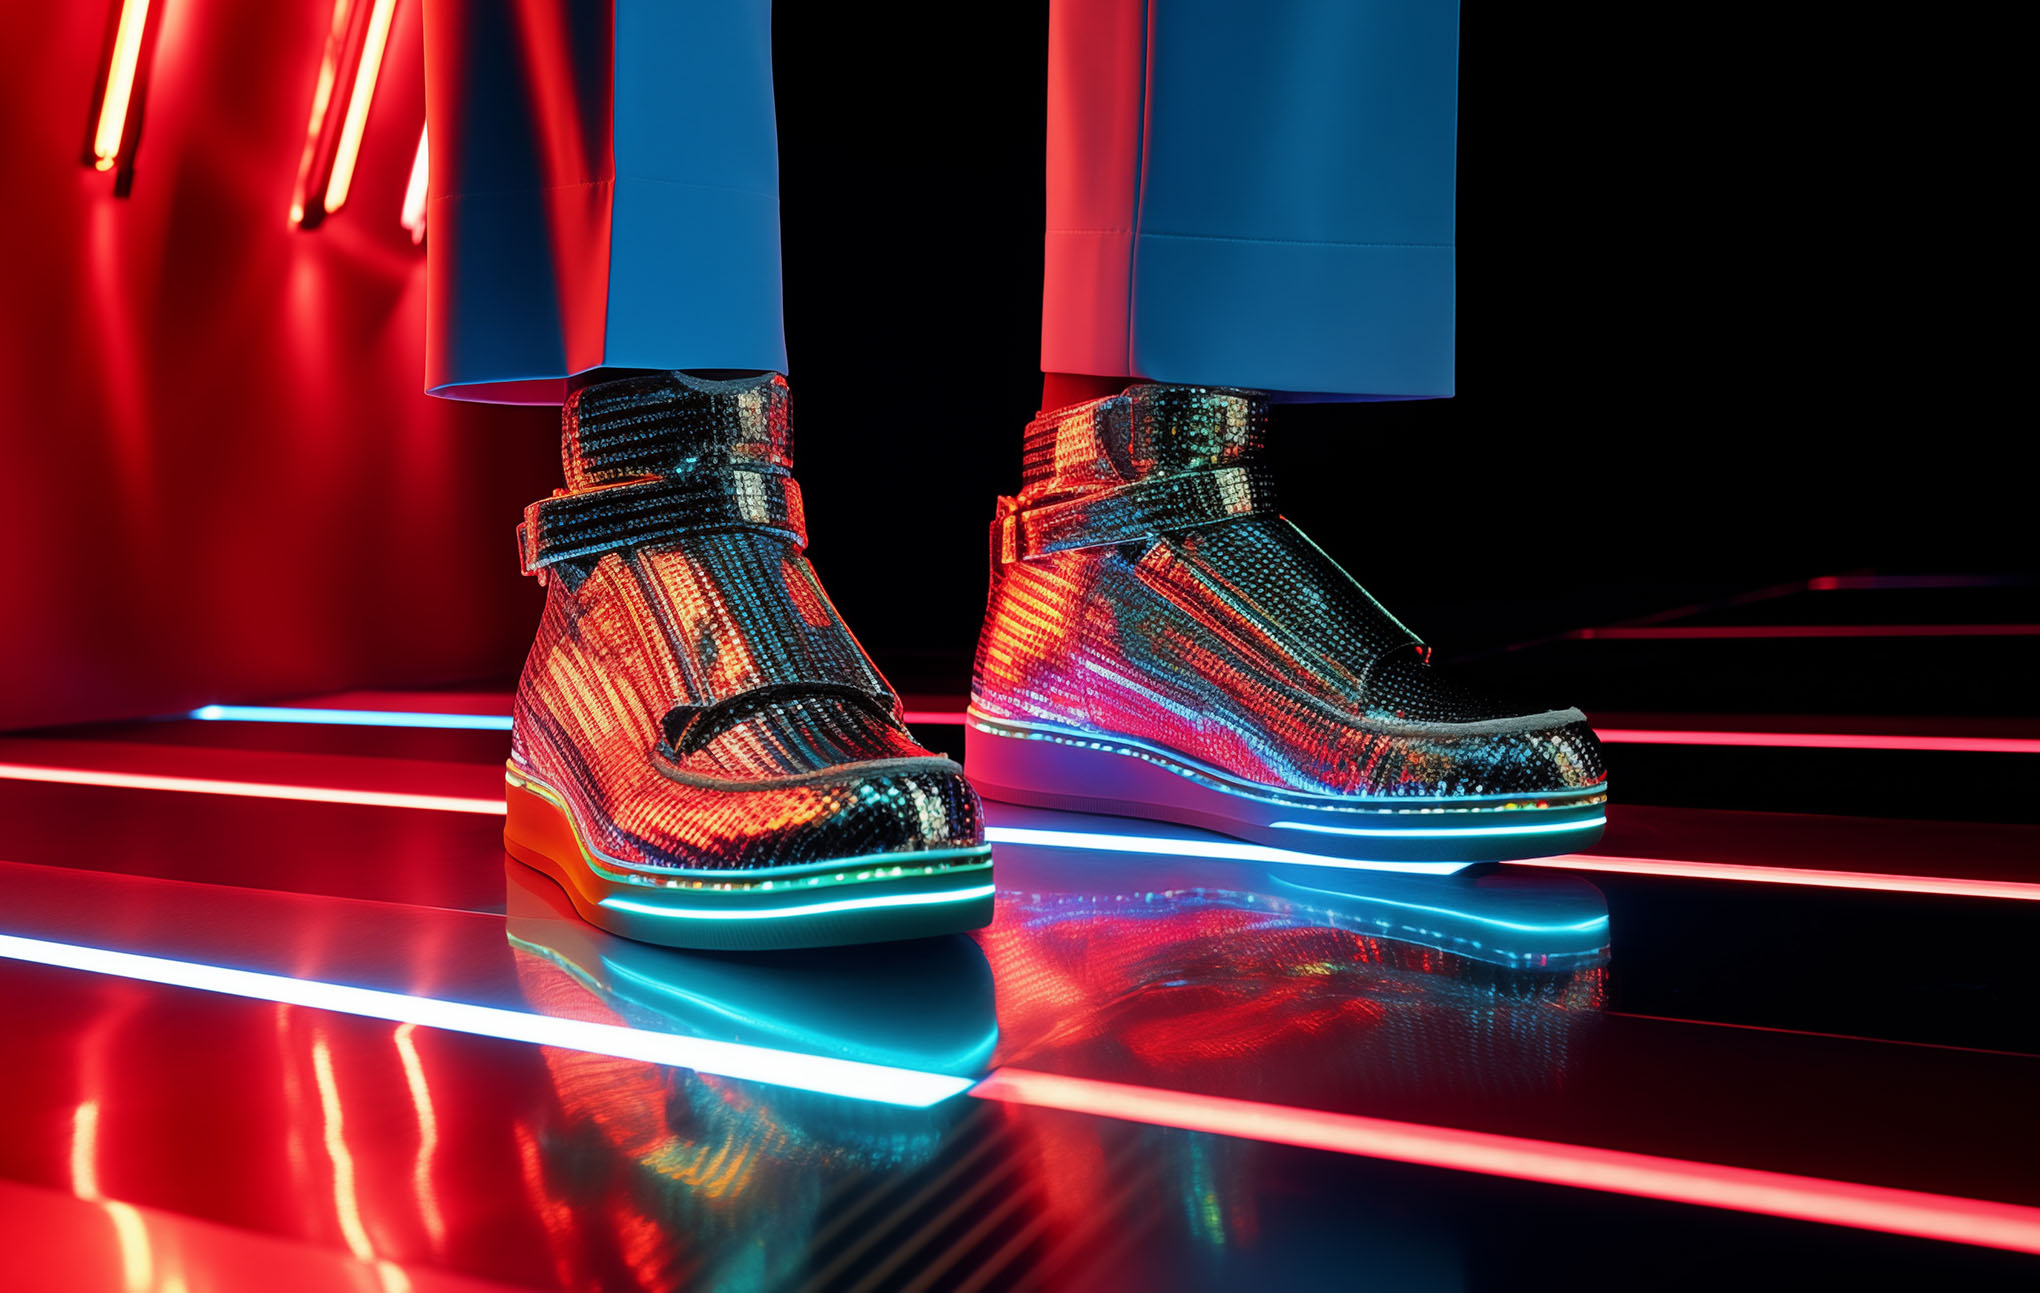 A pair of high-top shoes with a shiny, multicolored sequin design stands on a reflective surface amid vibrant, neon red and blue lights. the wearer's lower legs are visible, clad in bright blue trousers.